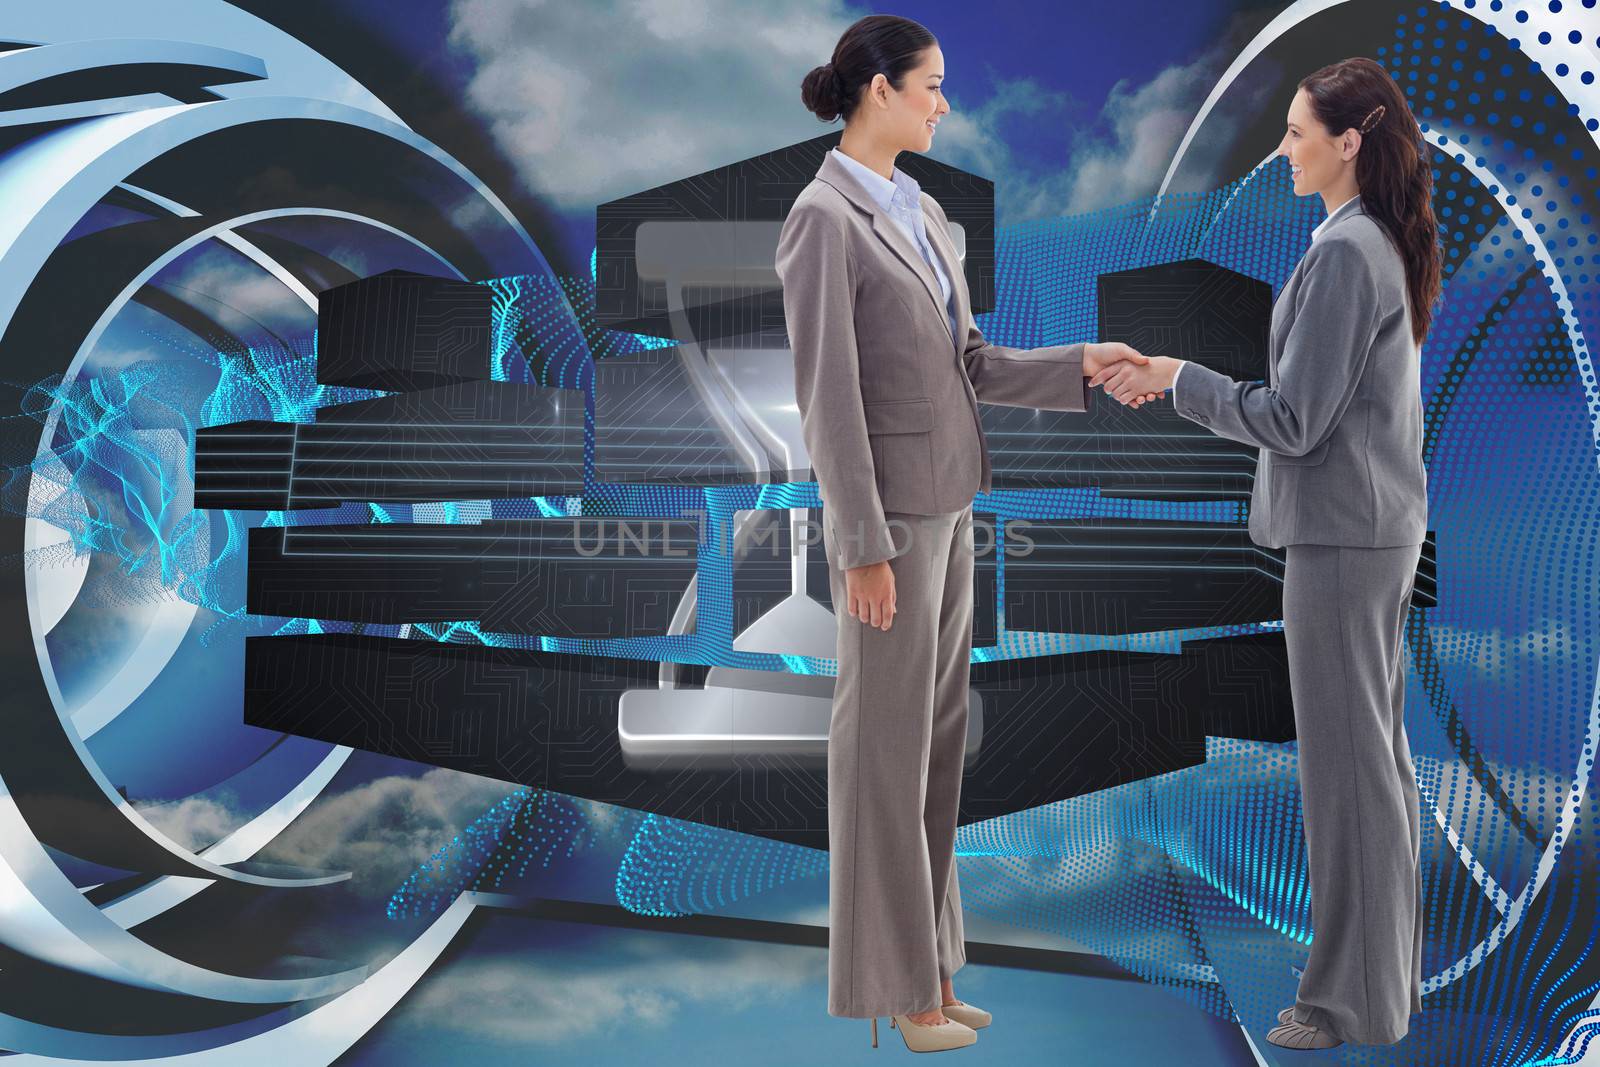 Composite image of two businesswomen shaking hands by Wavebreakmedia